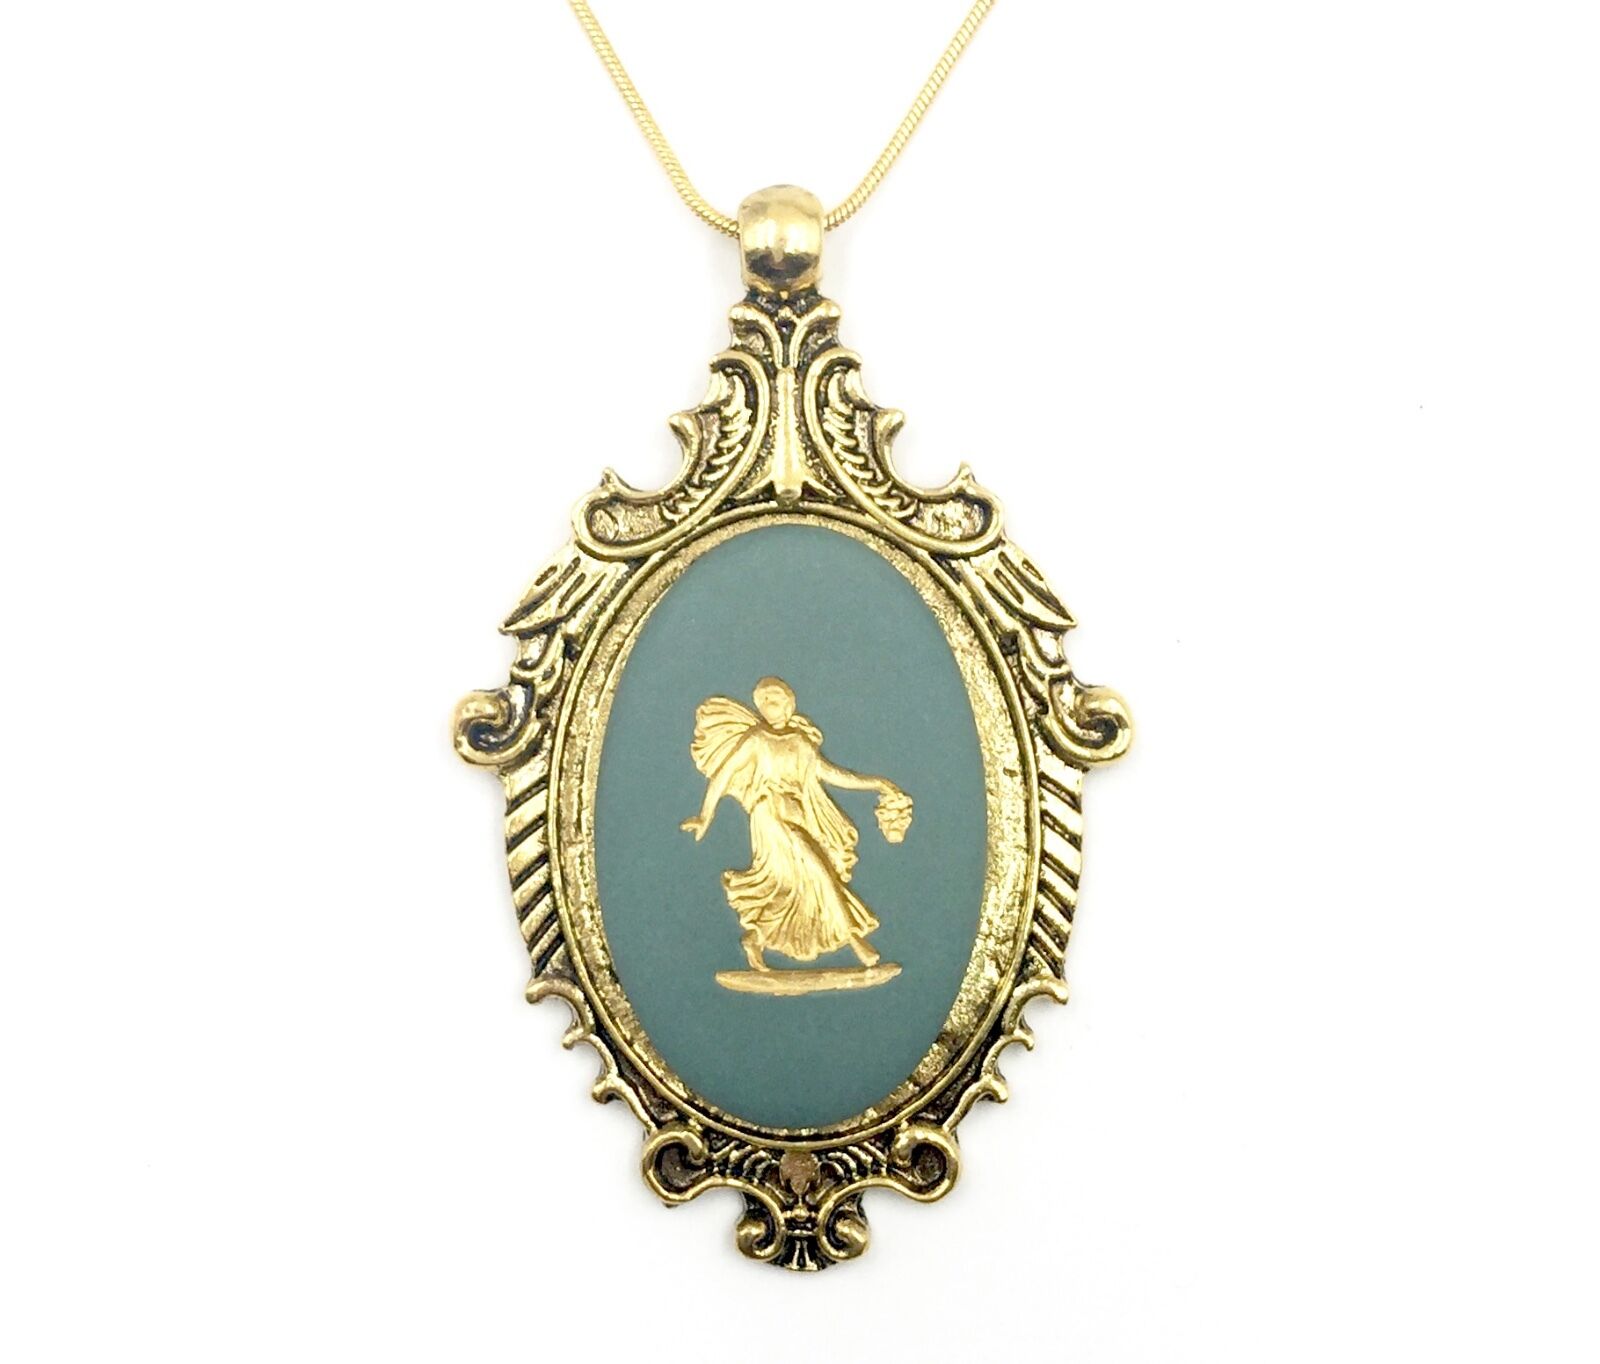 Authentic Wedgwood - Cameo Pendant on Gold Plate Chain